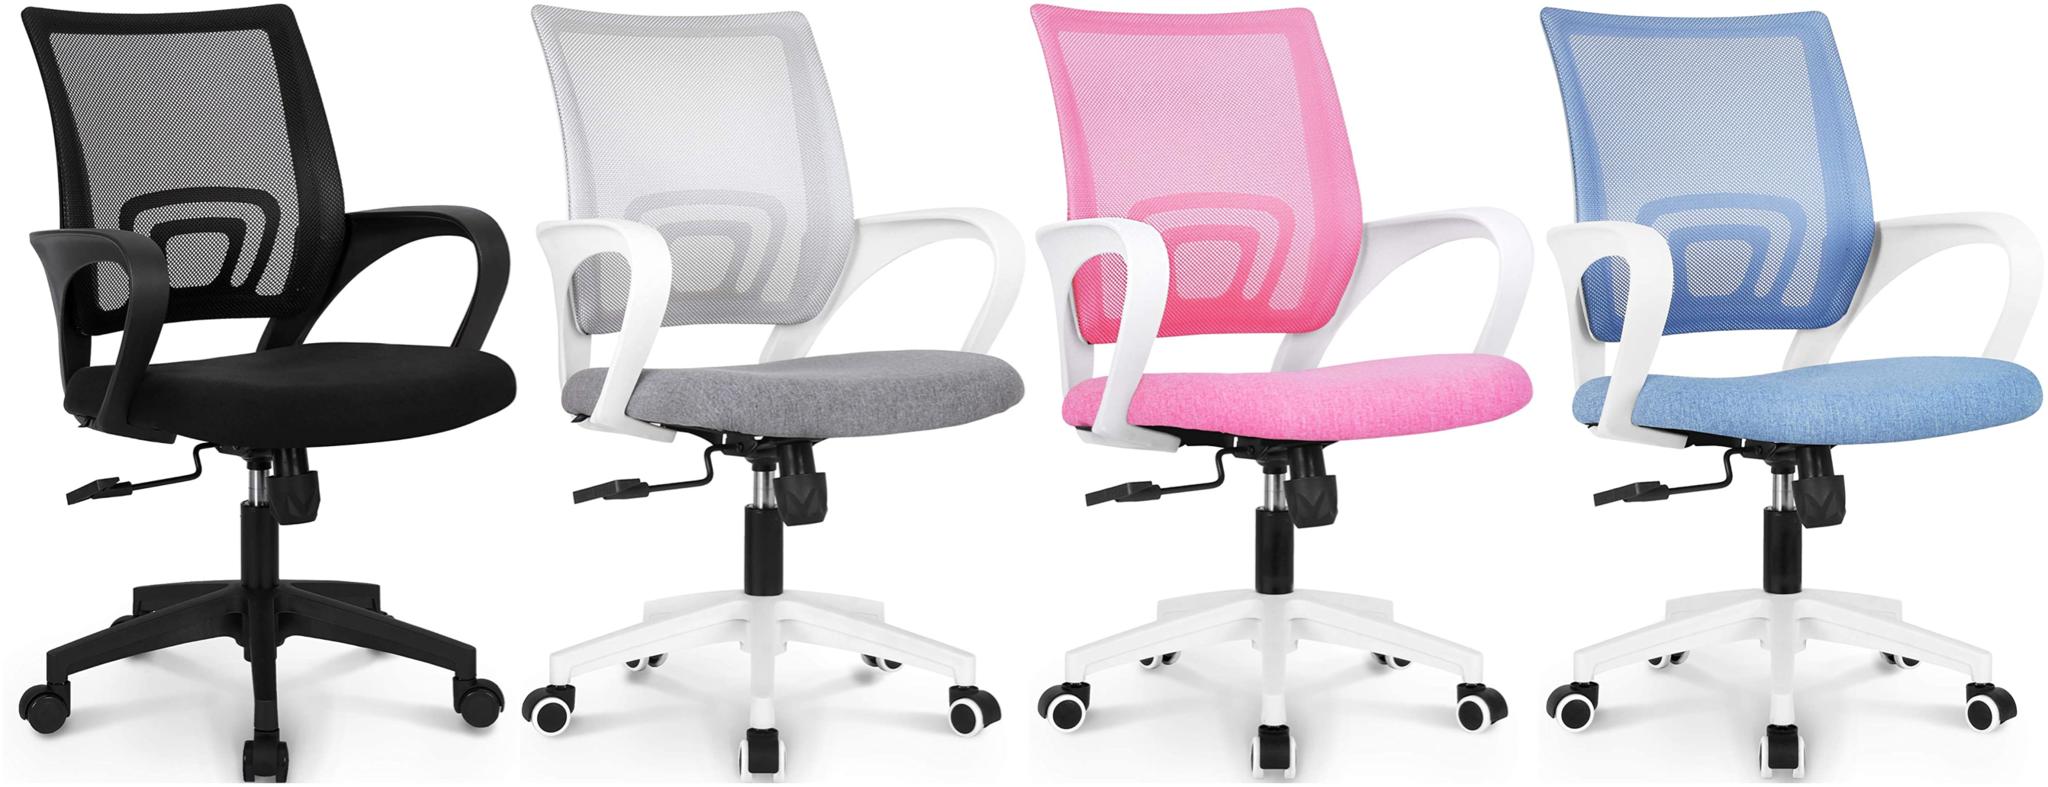 Neo Chair Office Gaming Desk Chair Colors